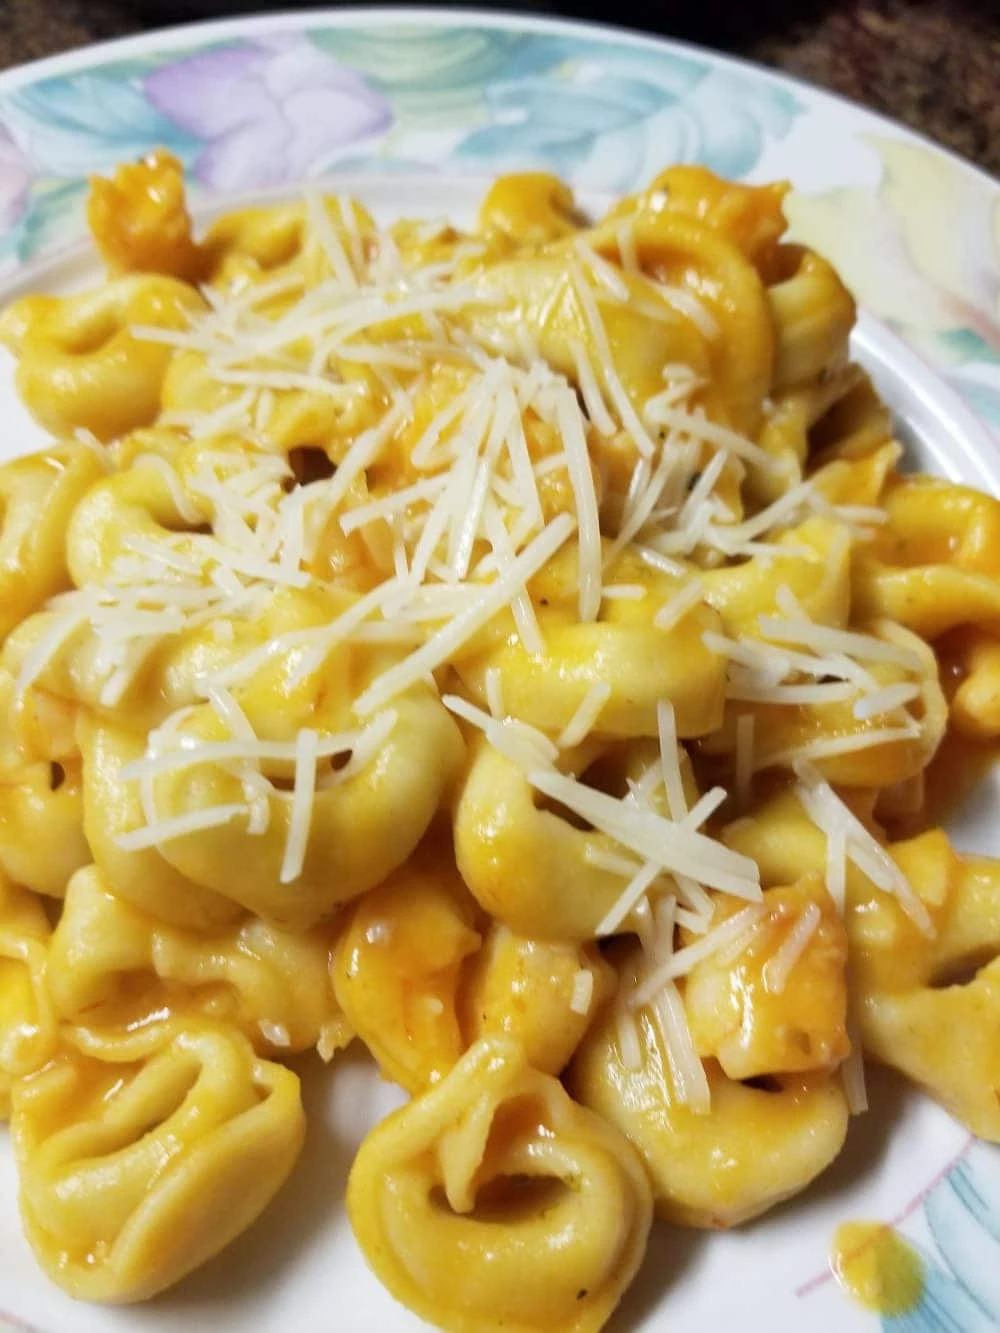 Shrimp and Tortellini with Butternut Squash Sauce - Delicious and fast dinner